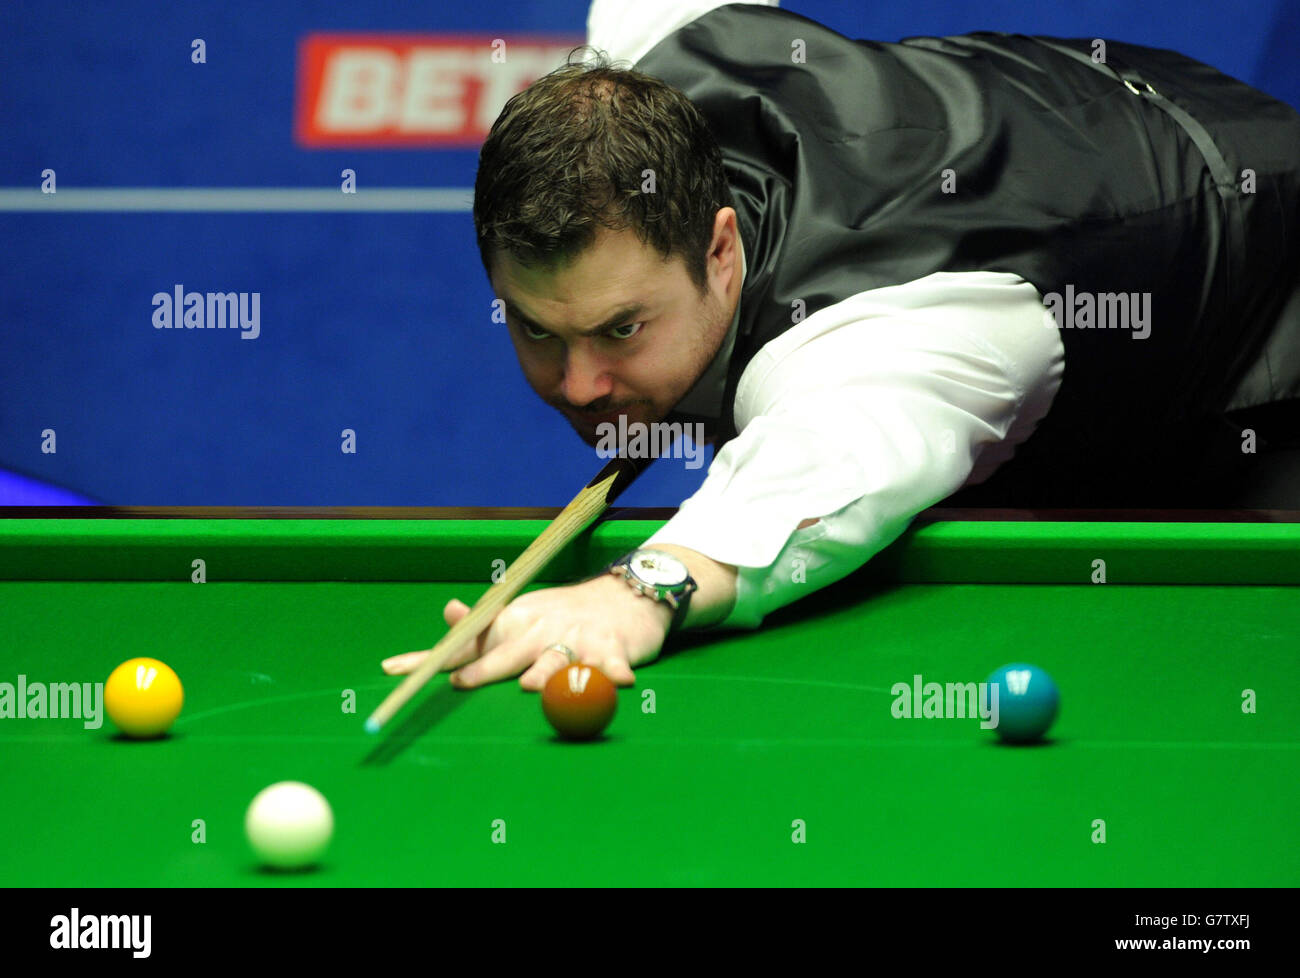 Kurt Maflin during his match against Mark Selby during the Betfred World Championships at the Crucible Theatre, Sheffield. Stock Photo